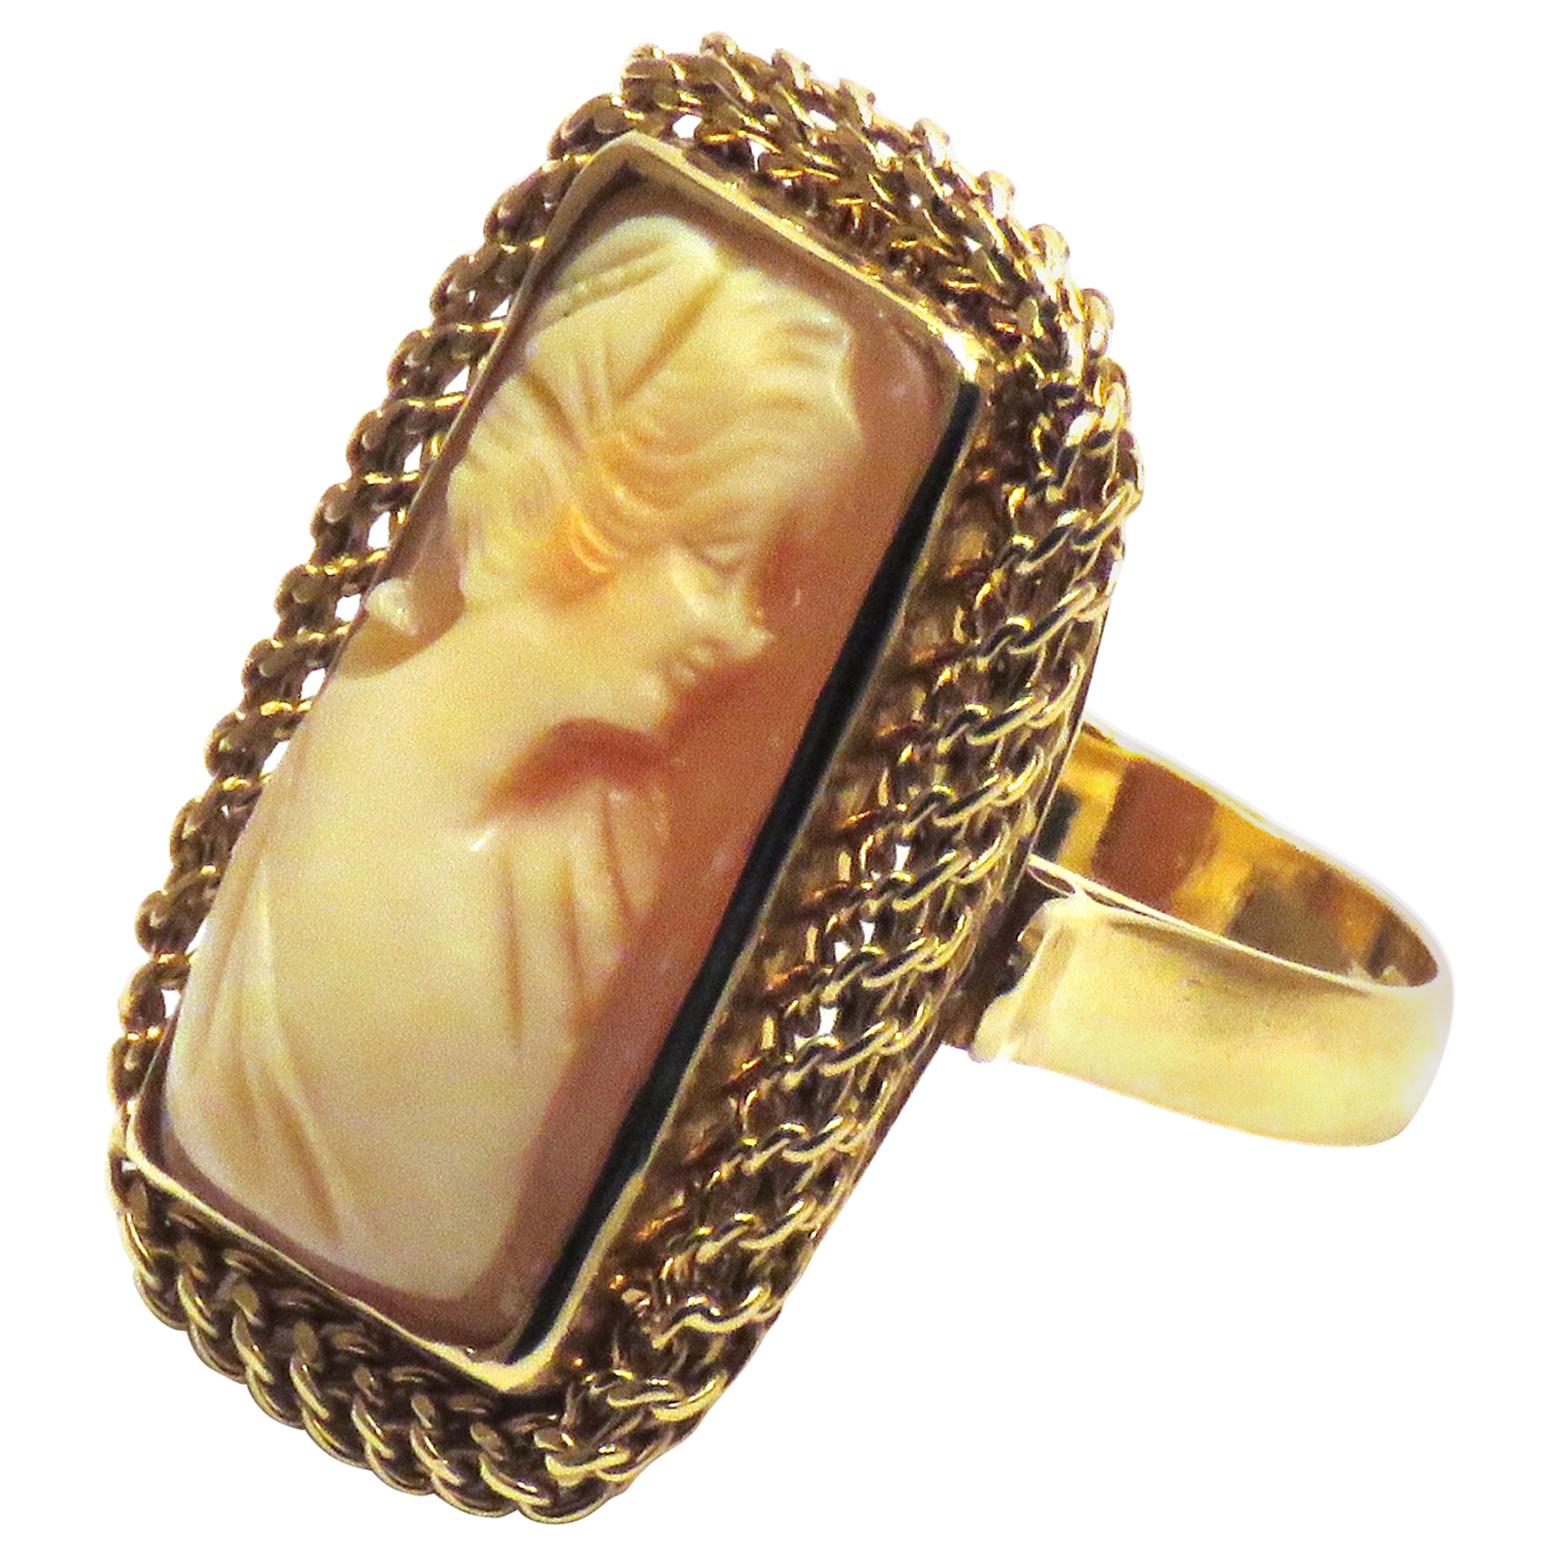 Antique Cameo 18 Karat Yellow Gold Ring Handcrafted in Italy